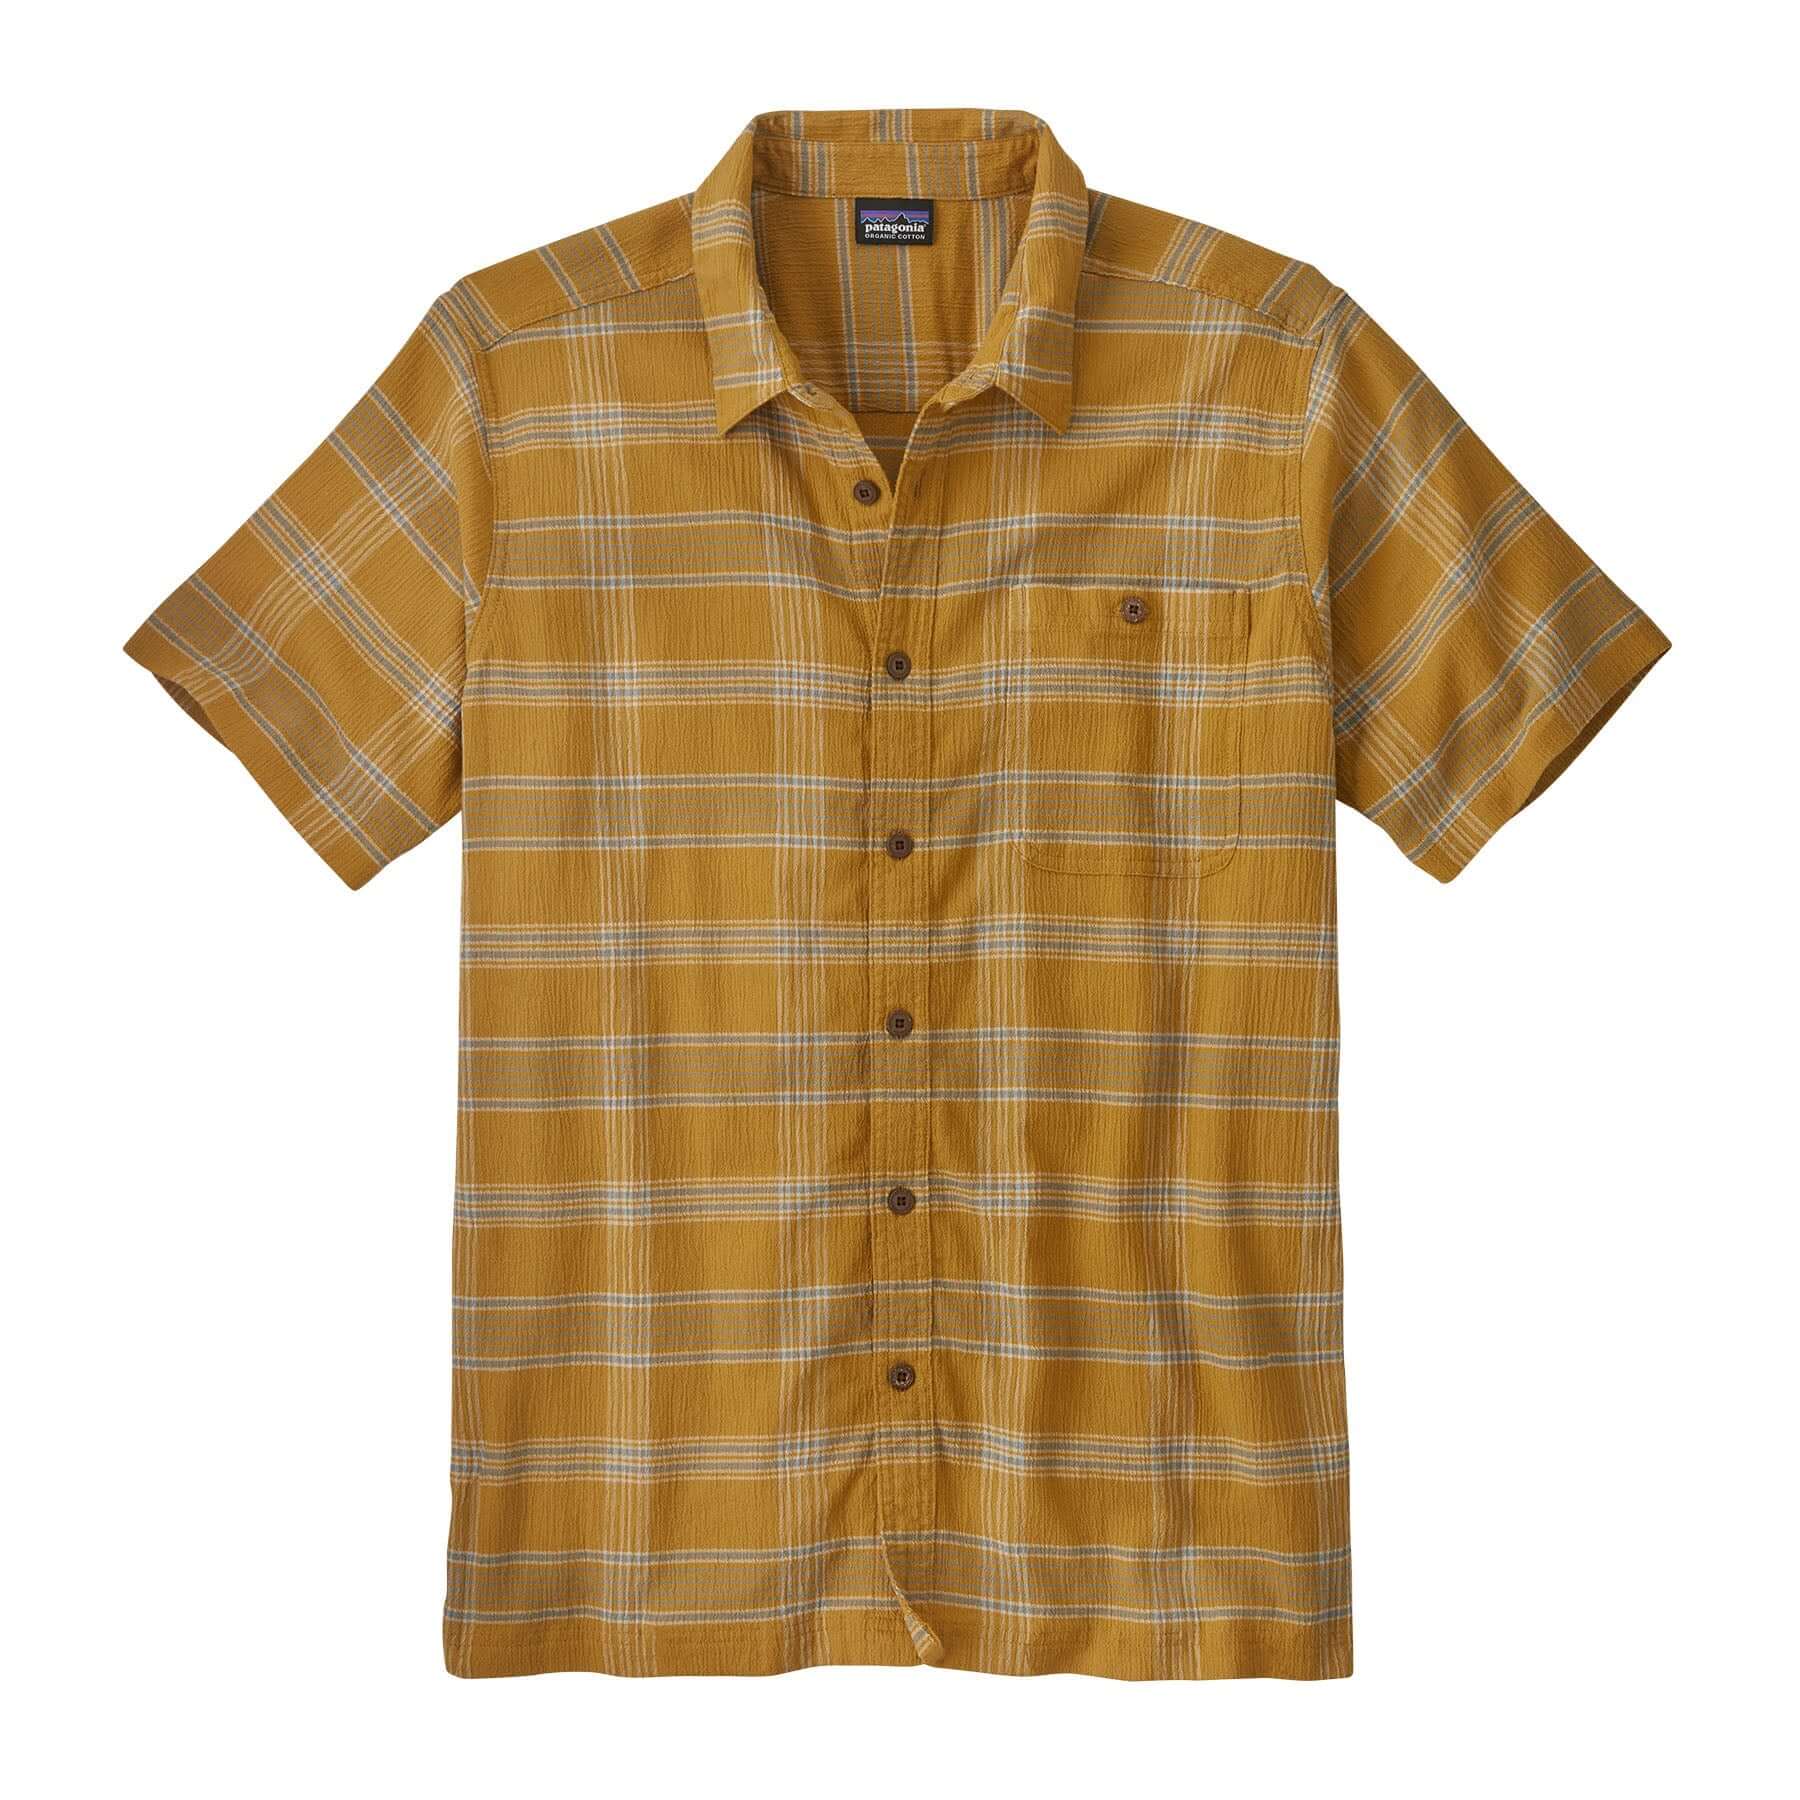 Men's A/C Shirt in Discovery: Pufferfish Gold | Patagonia Bend